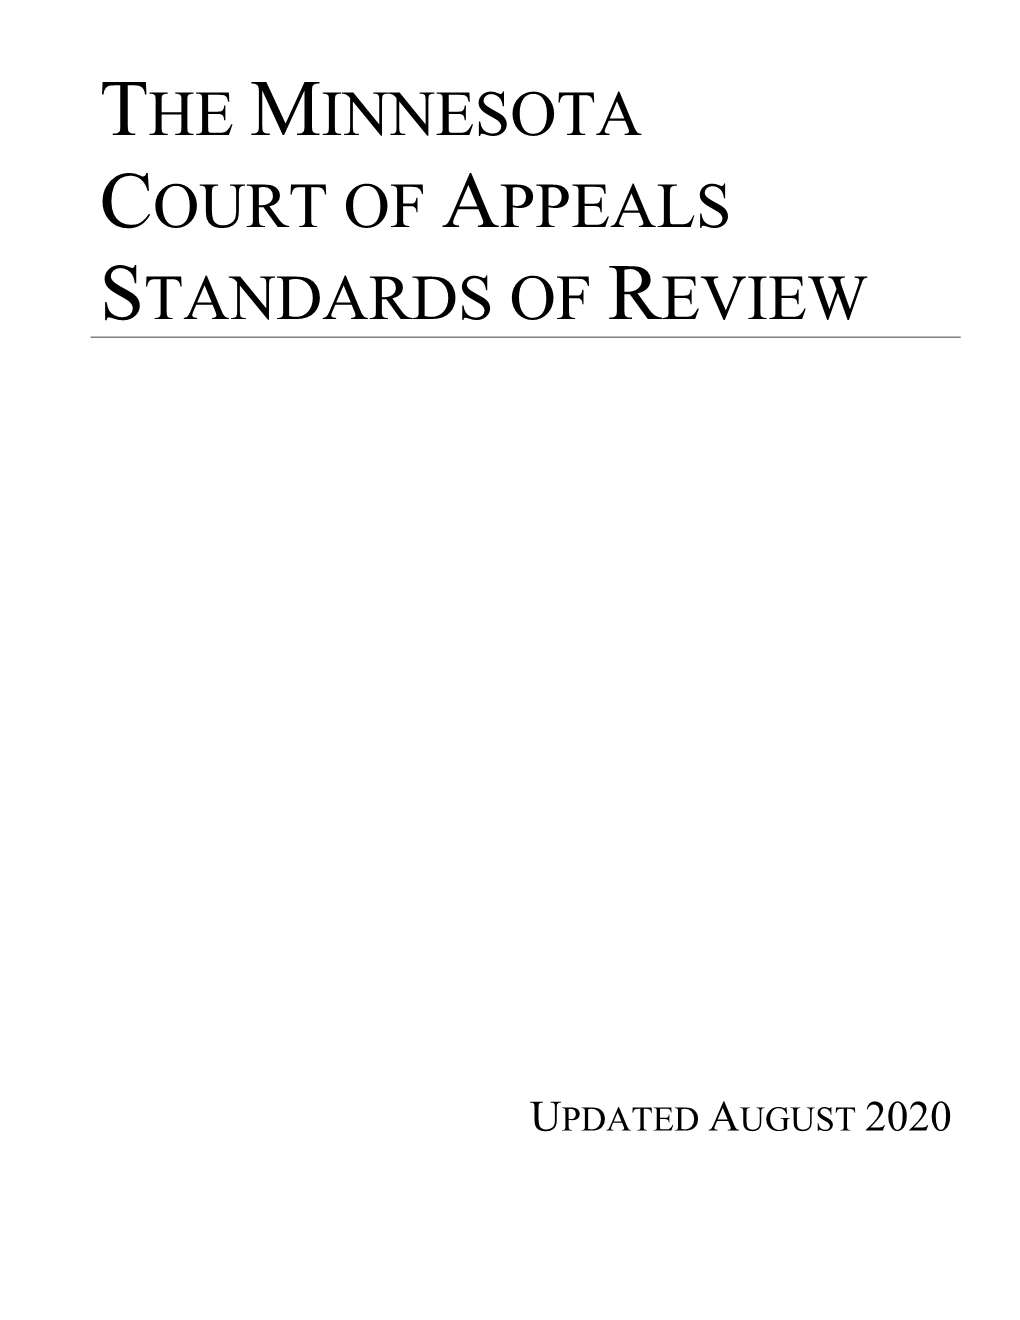 The Minnesota Court of Appeals Standards of Review